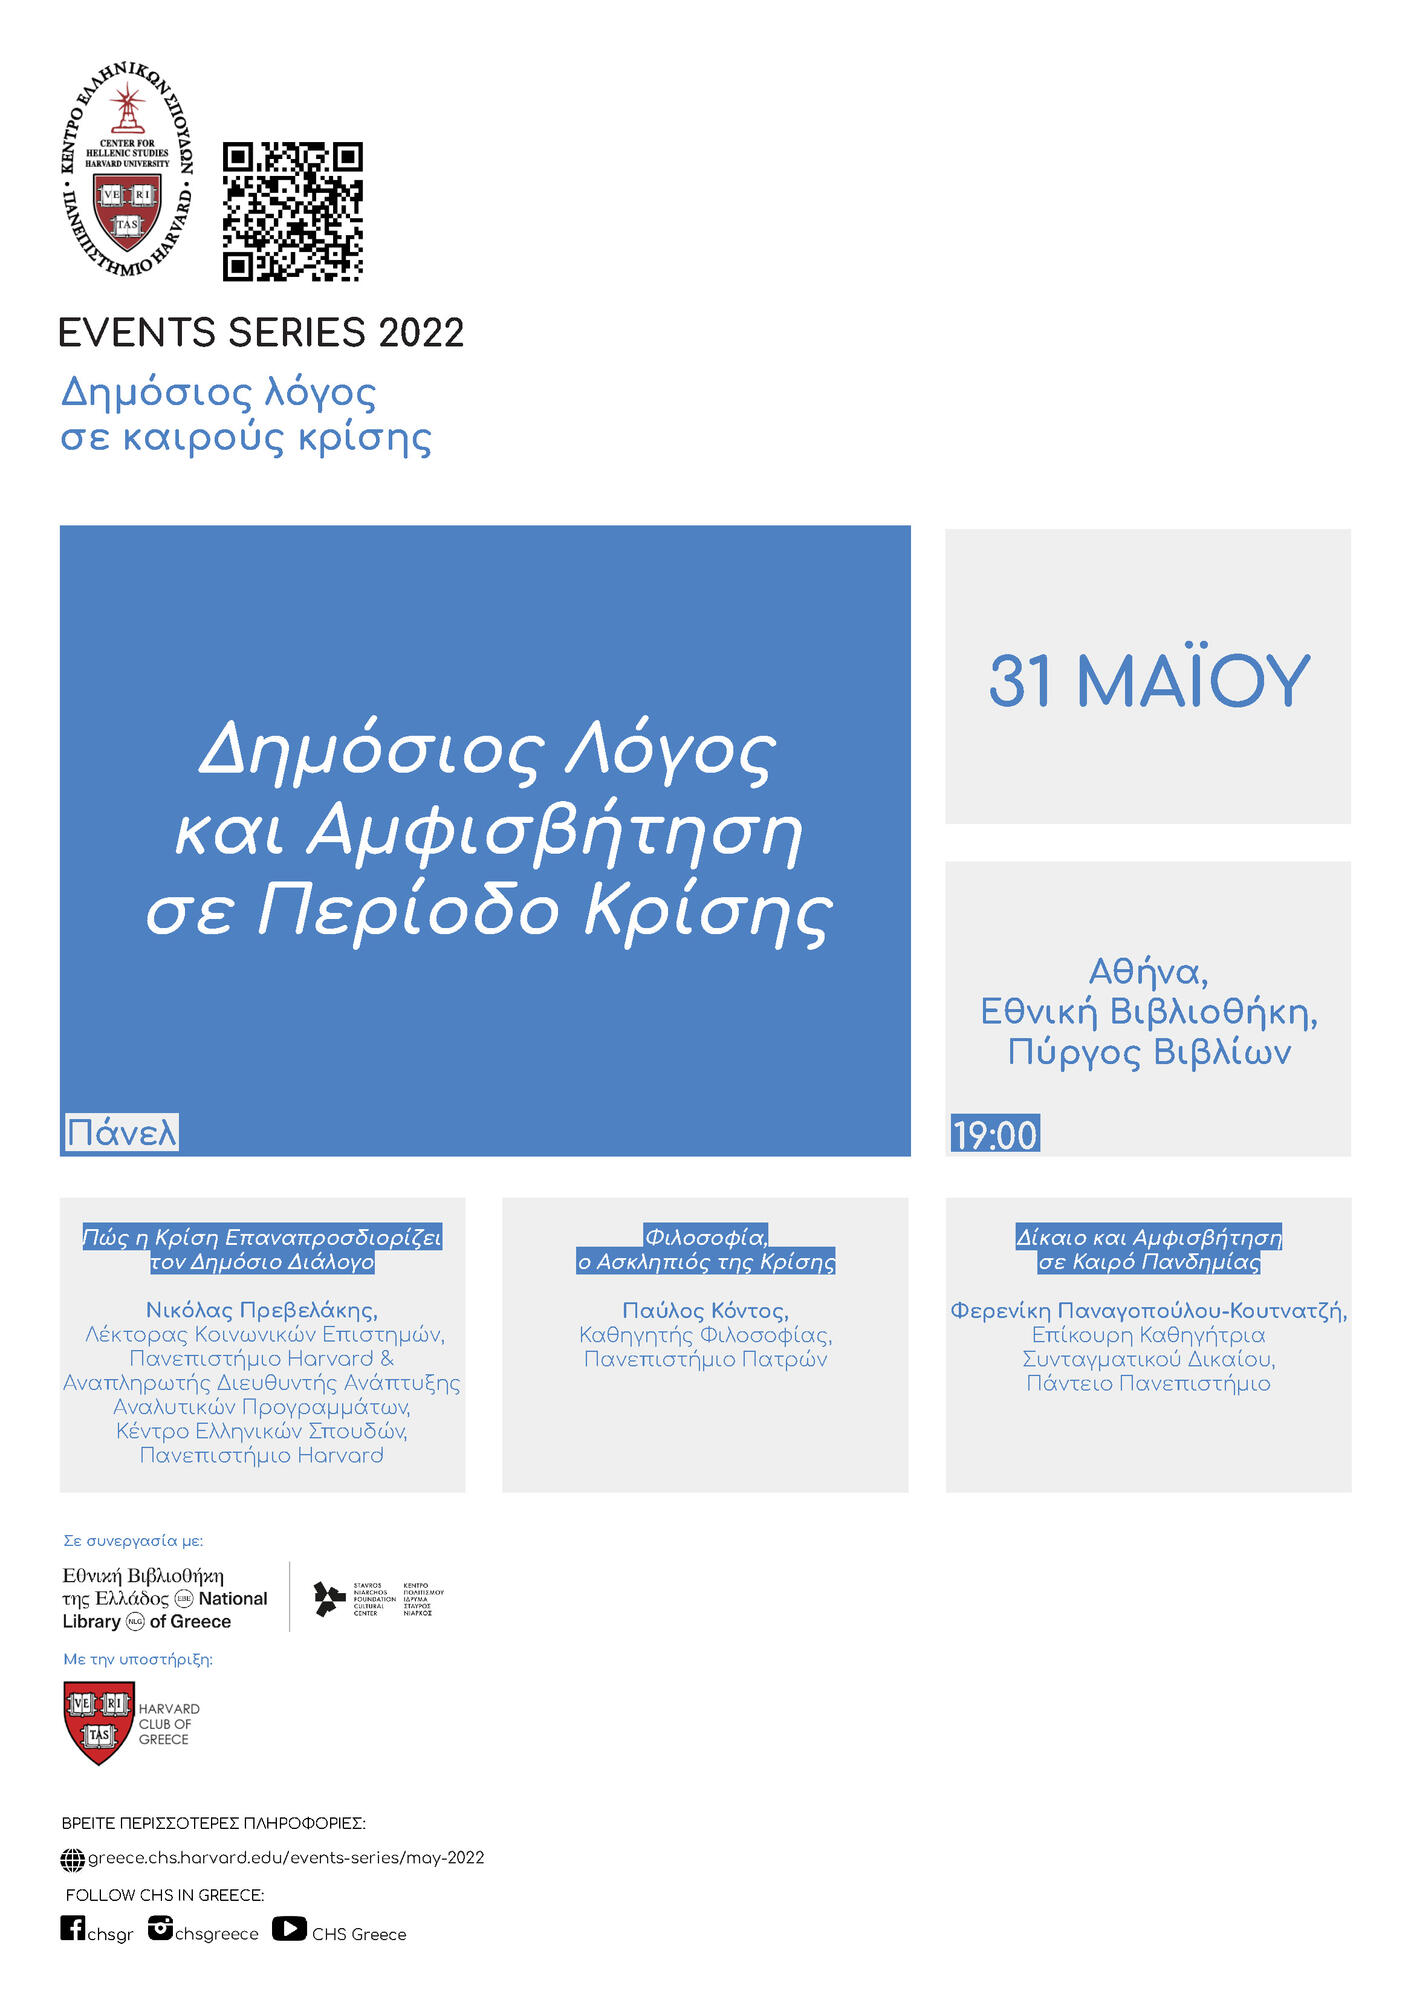 Panel discussion on the topic of "Public Discourse and Dispute in a Time of Crisis" / Poster with the event's info featuring a few grey and blue tiles against a white background.